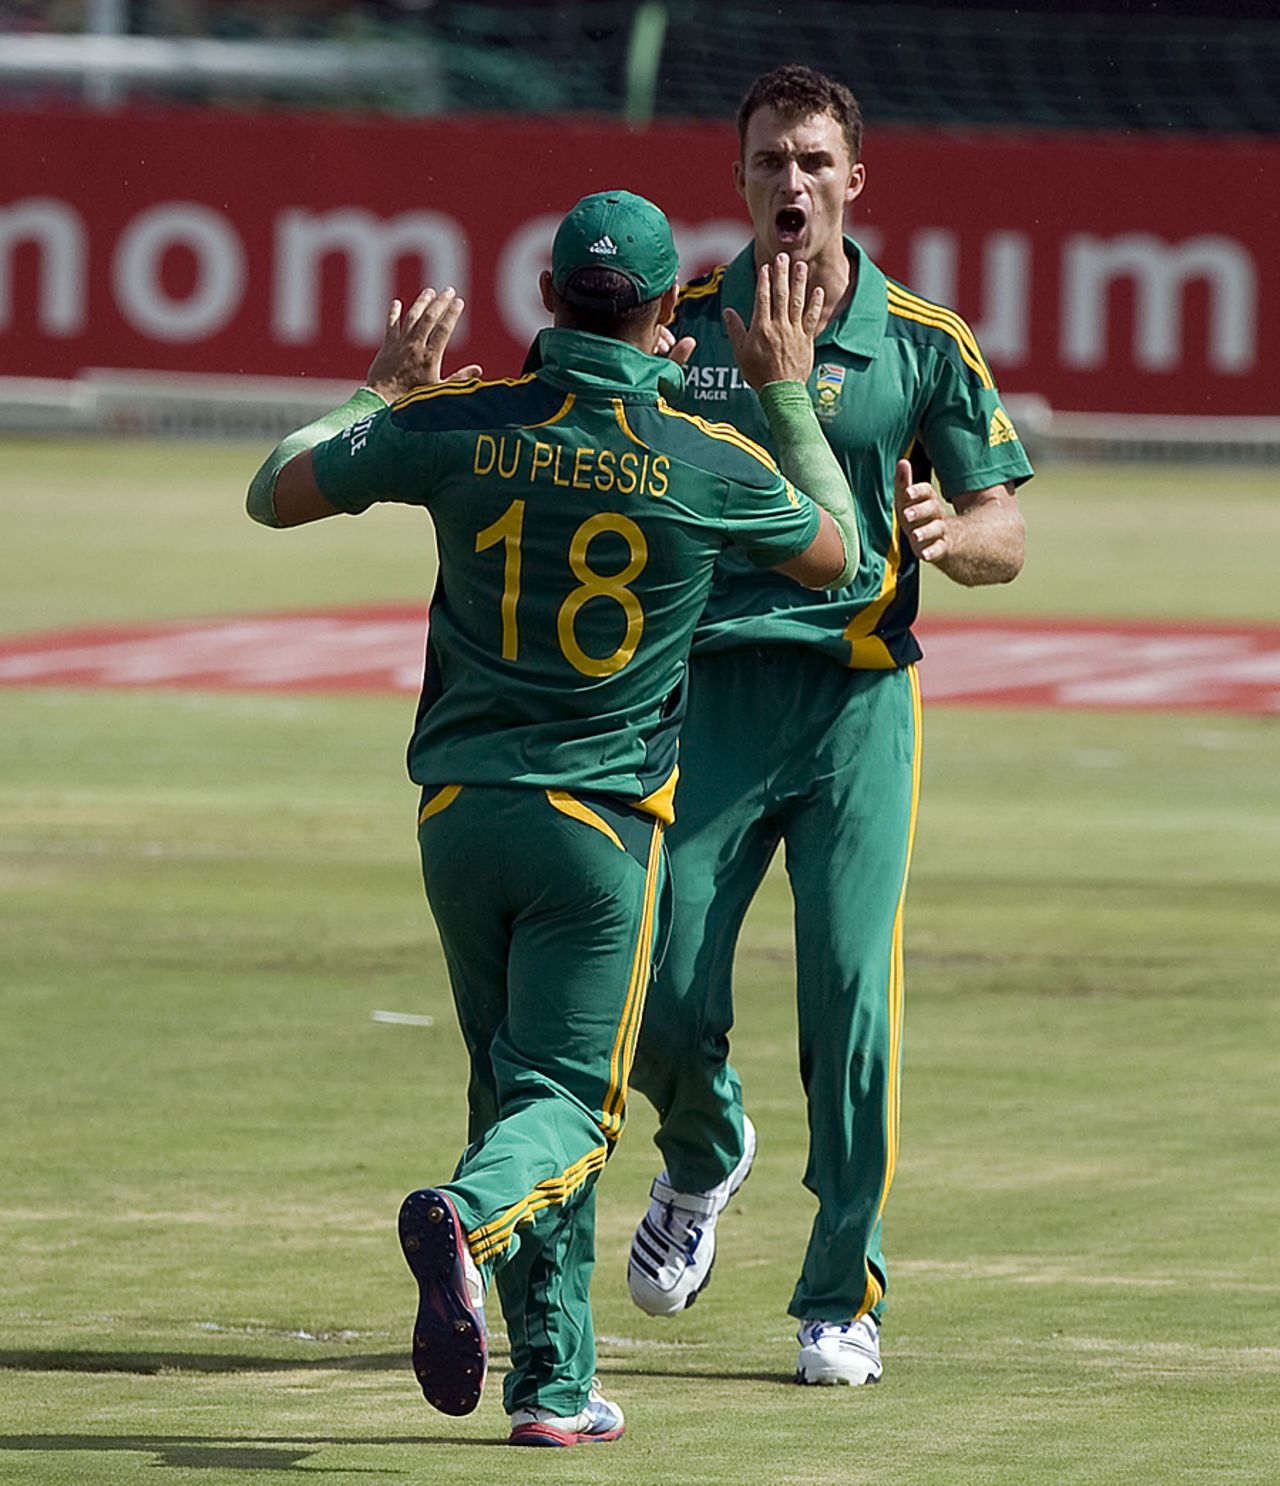 Ryan McLaren was South Africa's joint-highest wicket-taker with four scalps, South Africa v New Zealand, 3rd ODI, Potchefstroom, January 25, 2013